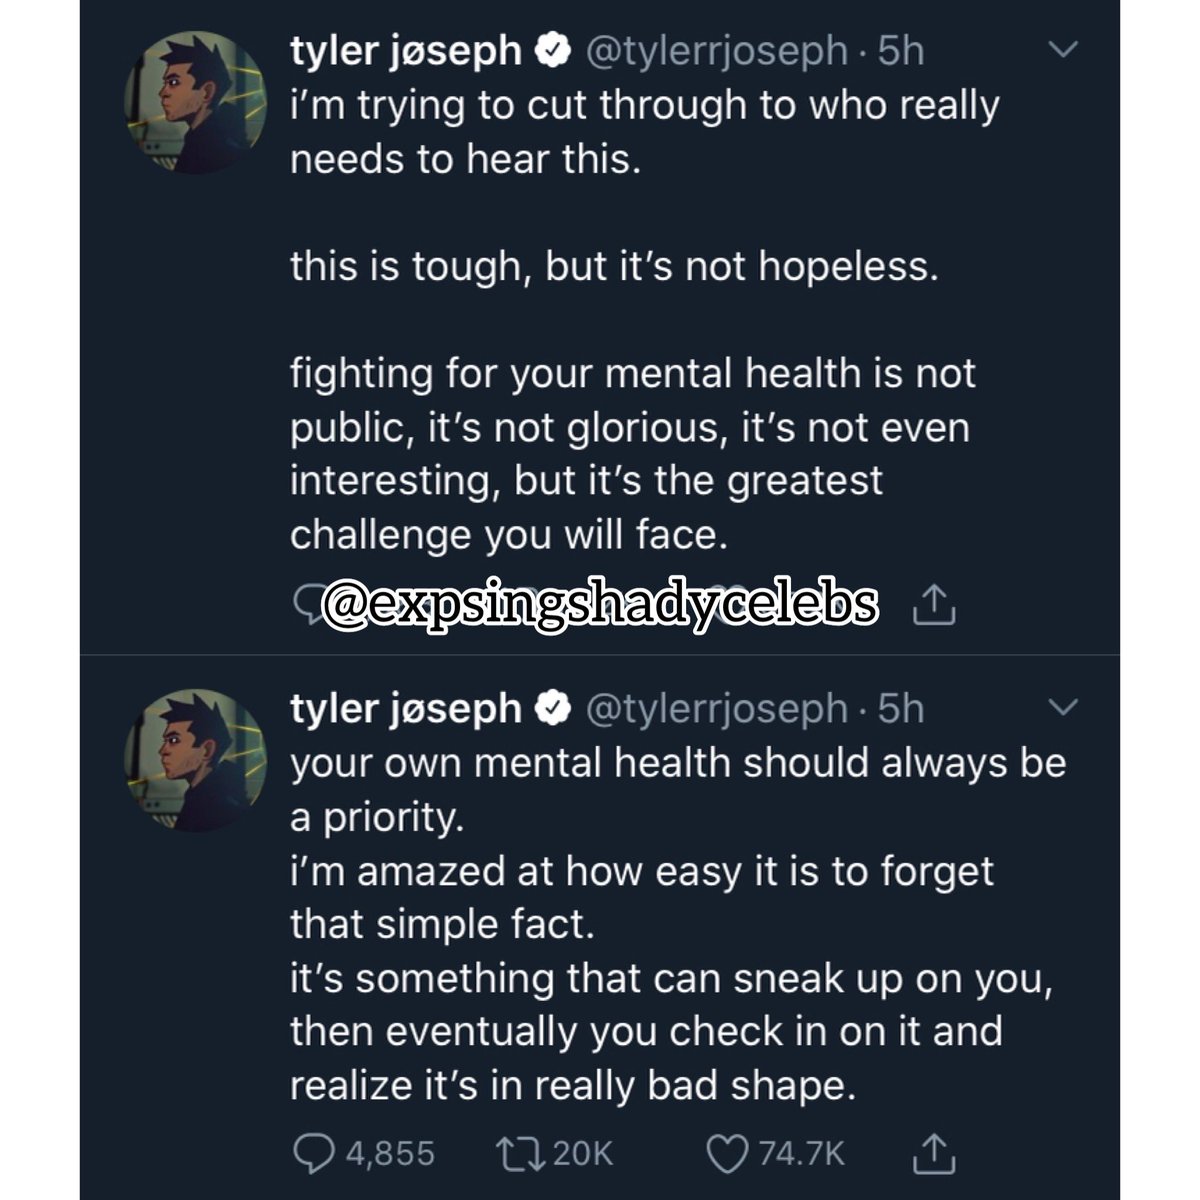 Twenty One Pilots member Tyler Joseph is receiving backlash after after he tweeted in regards to his fans wanting him to use his platform to speak out against police brutality Pt1